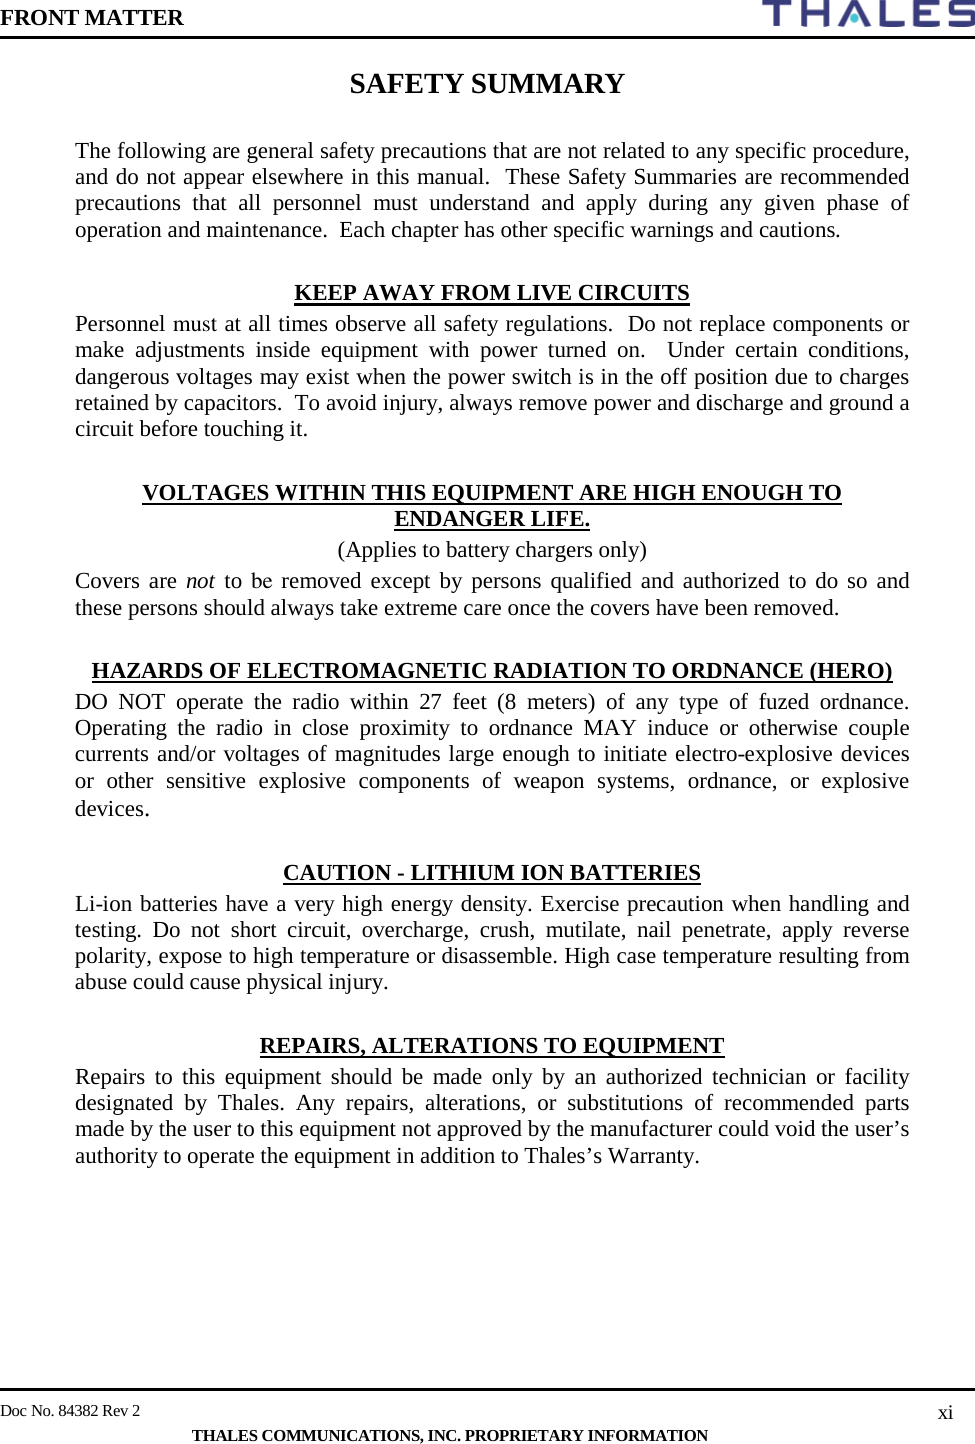 FRONT MATTER    Doc No. 84382 Rev 2     THALES COMMUNICATIONS, INC. PROPRIETARY INFORMATION xi SAFETY SUMMARY  The following are general safety precautions that are not related to any specific procedure, and do not appear elsewhere in this manual.  These Safety Summaries are recommended precautions that all personnel must understand and apply during any given phase of operation and maintenance.  Each chapter has other specific warnings and cautions.  KEEP AWAY FROM LIVE CIRCUITS Personnel must at all times observe all safety regulations.  Do not replace components or make adjustments inside equipment with power turned on.  Under certain conditions, dangerous voltages may exist when the power switch is in the off position due to charges retained by capacitors.  To avoid injury, always remove power and discharge and ground a circuit before touching it.  VOLTAGES WITHIN THIS EQUIPMENT ARE HIGH ENOUGH TO ENDANGER LIFE. (Applies to battery chargers only) Covers are not to be removed except by persons qualified and authorized to do so and these persons should always take extreme care once the covers have been removed.  HAZARDS OF ELECTROMAGNETIC RADIATION TO ORDNANCE (HERO) DO NOT operate the radio within 27 feet (8 meters) of any type of fuzed ordnance. Operating the radio in close proximity to ordnance MAY induce or otherwise couple currents and/or voltages of magnitudes large enough to initiate electro-explosive devices or other sensitive explosive components of weapon systems, ordnance, or explosive devices.  CAUTION - LITHIUM ION BATTERIES Li-ion batteries have a very high energy density. Exercise precaution when handling and testing. Do not short circuit, overcharge, crush, mutilate, nail penetrate, apply reverse polarity, expose to high temperature or disassemble. High case temperature resulting from abuse could cause physical injury.  REPAIRS, ALTERATIONS TO EQUIPMENT Repairs to this equipment should be made only by an authorized technician or facility designated by Thales. Any repairs, alterations, or substitutions of recommended parts made by the user to this equipment not approved by the manufacturer could void the user’s authority to operate the equipment in addition to Thales’s Warranty.  